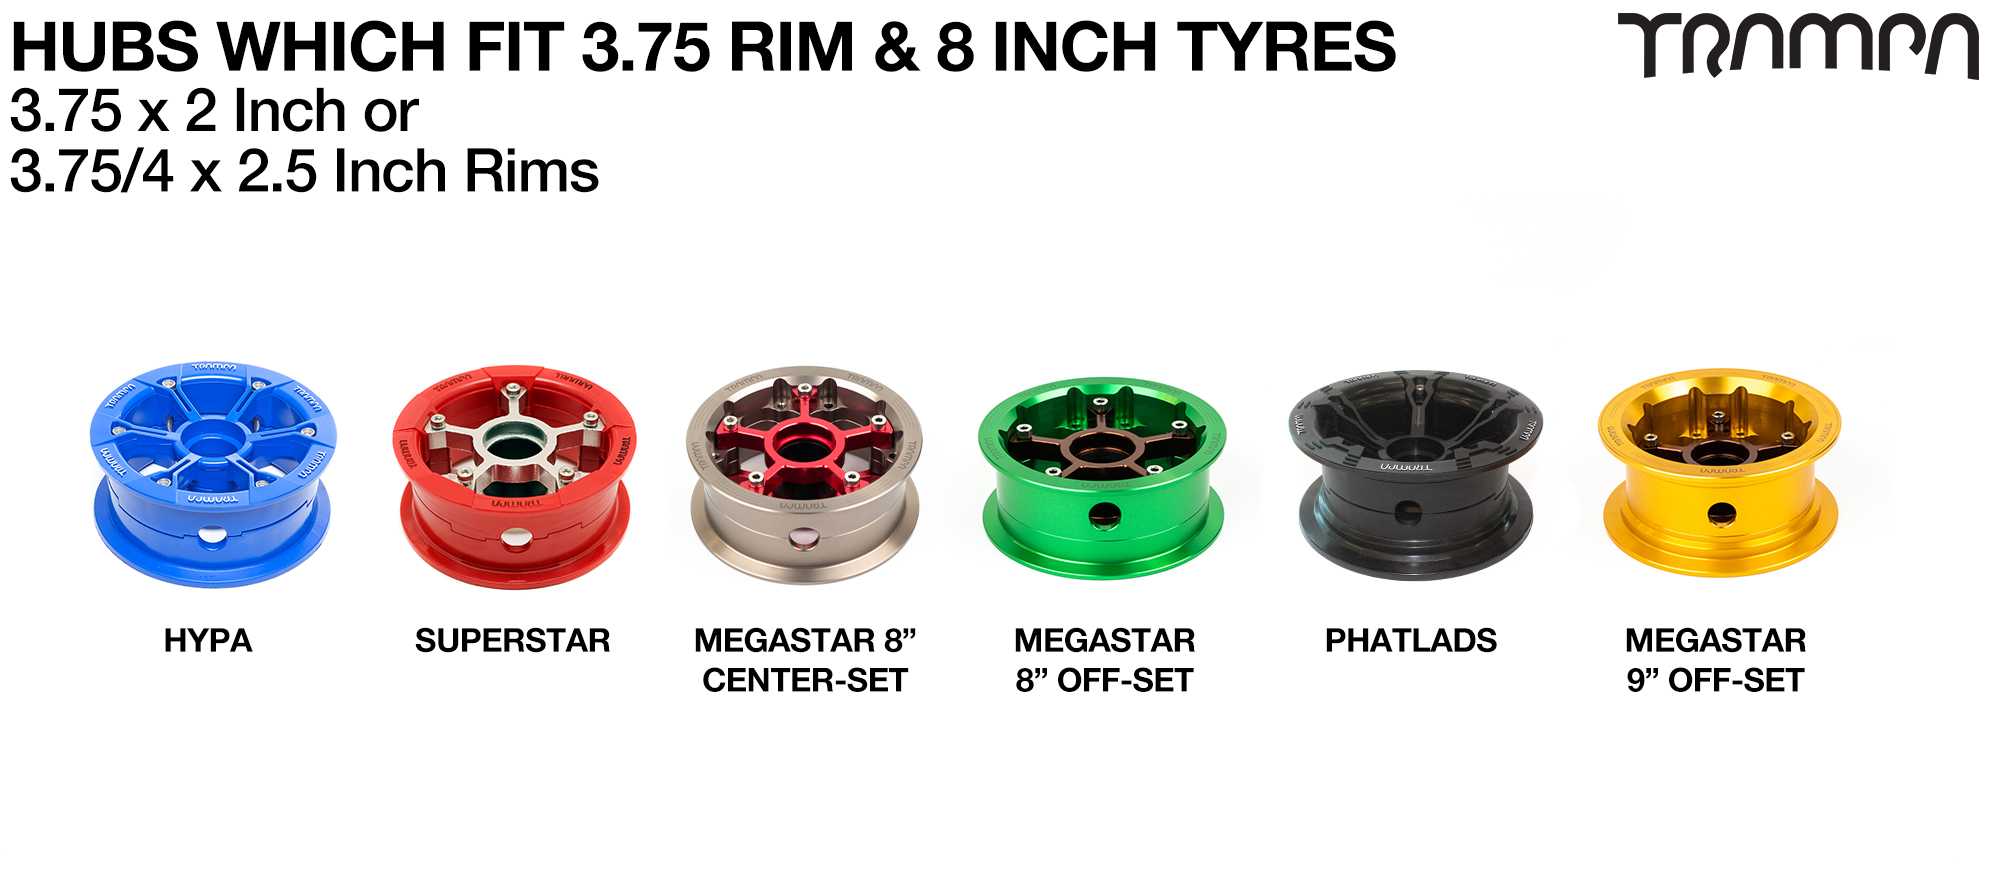 TRAMPA TREADS 8 Inch Tyres measure 3.75x 2x 8 Inch or 200x50mm with 3.75 inch Rim fits all 3.75 inch Hubs